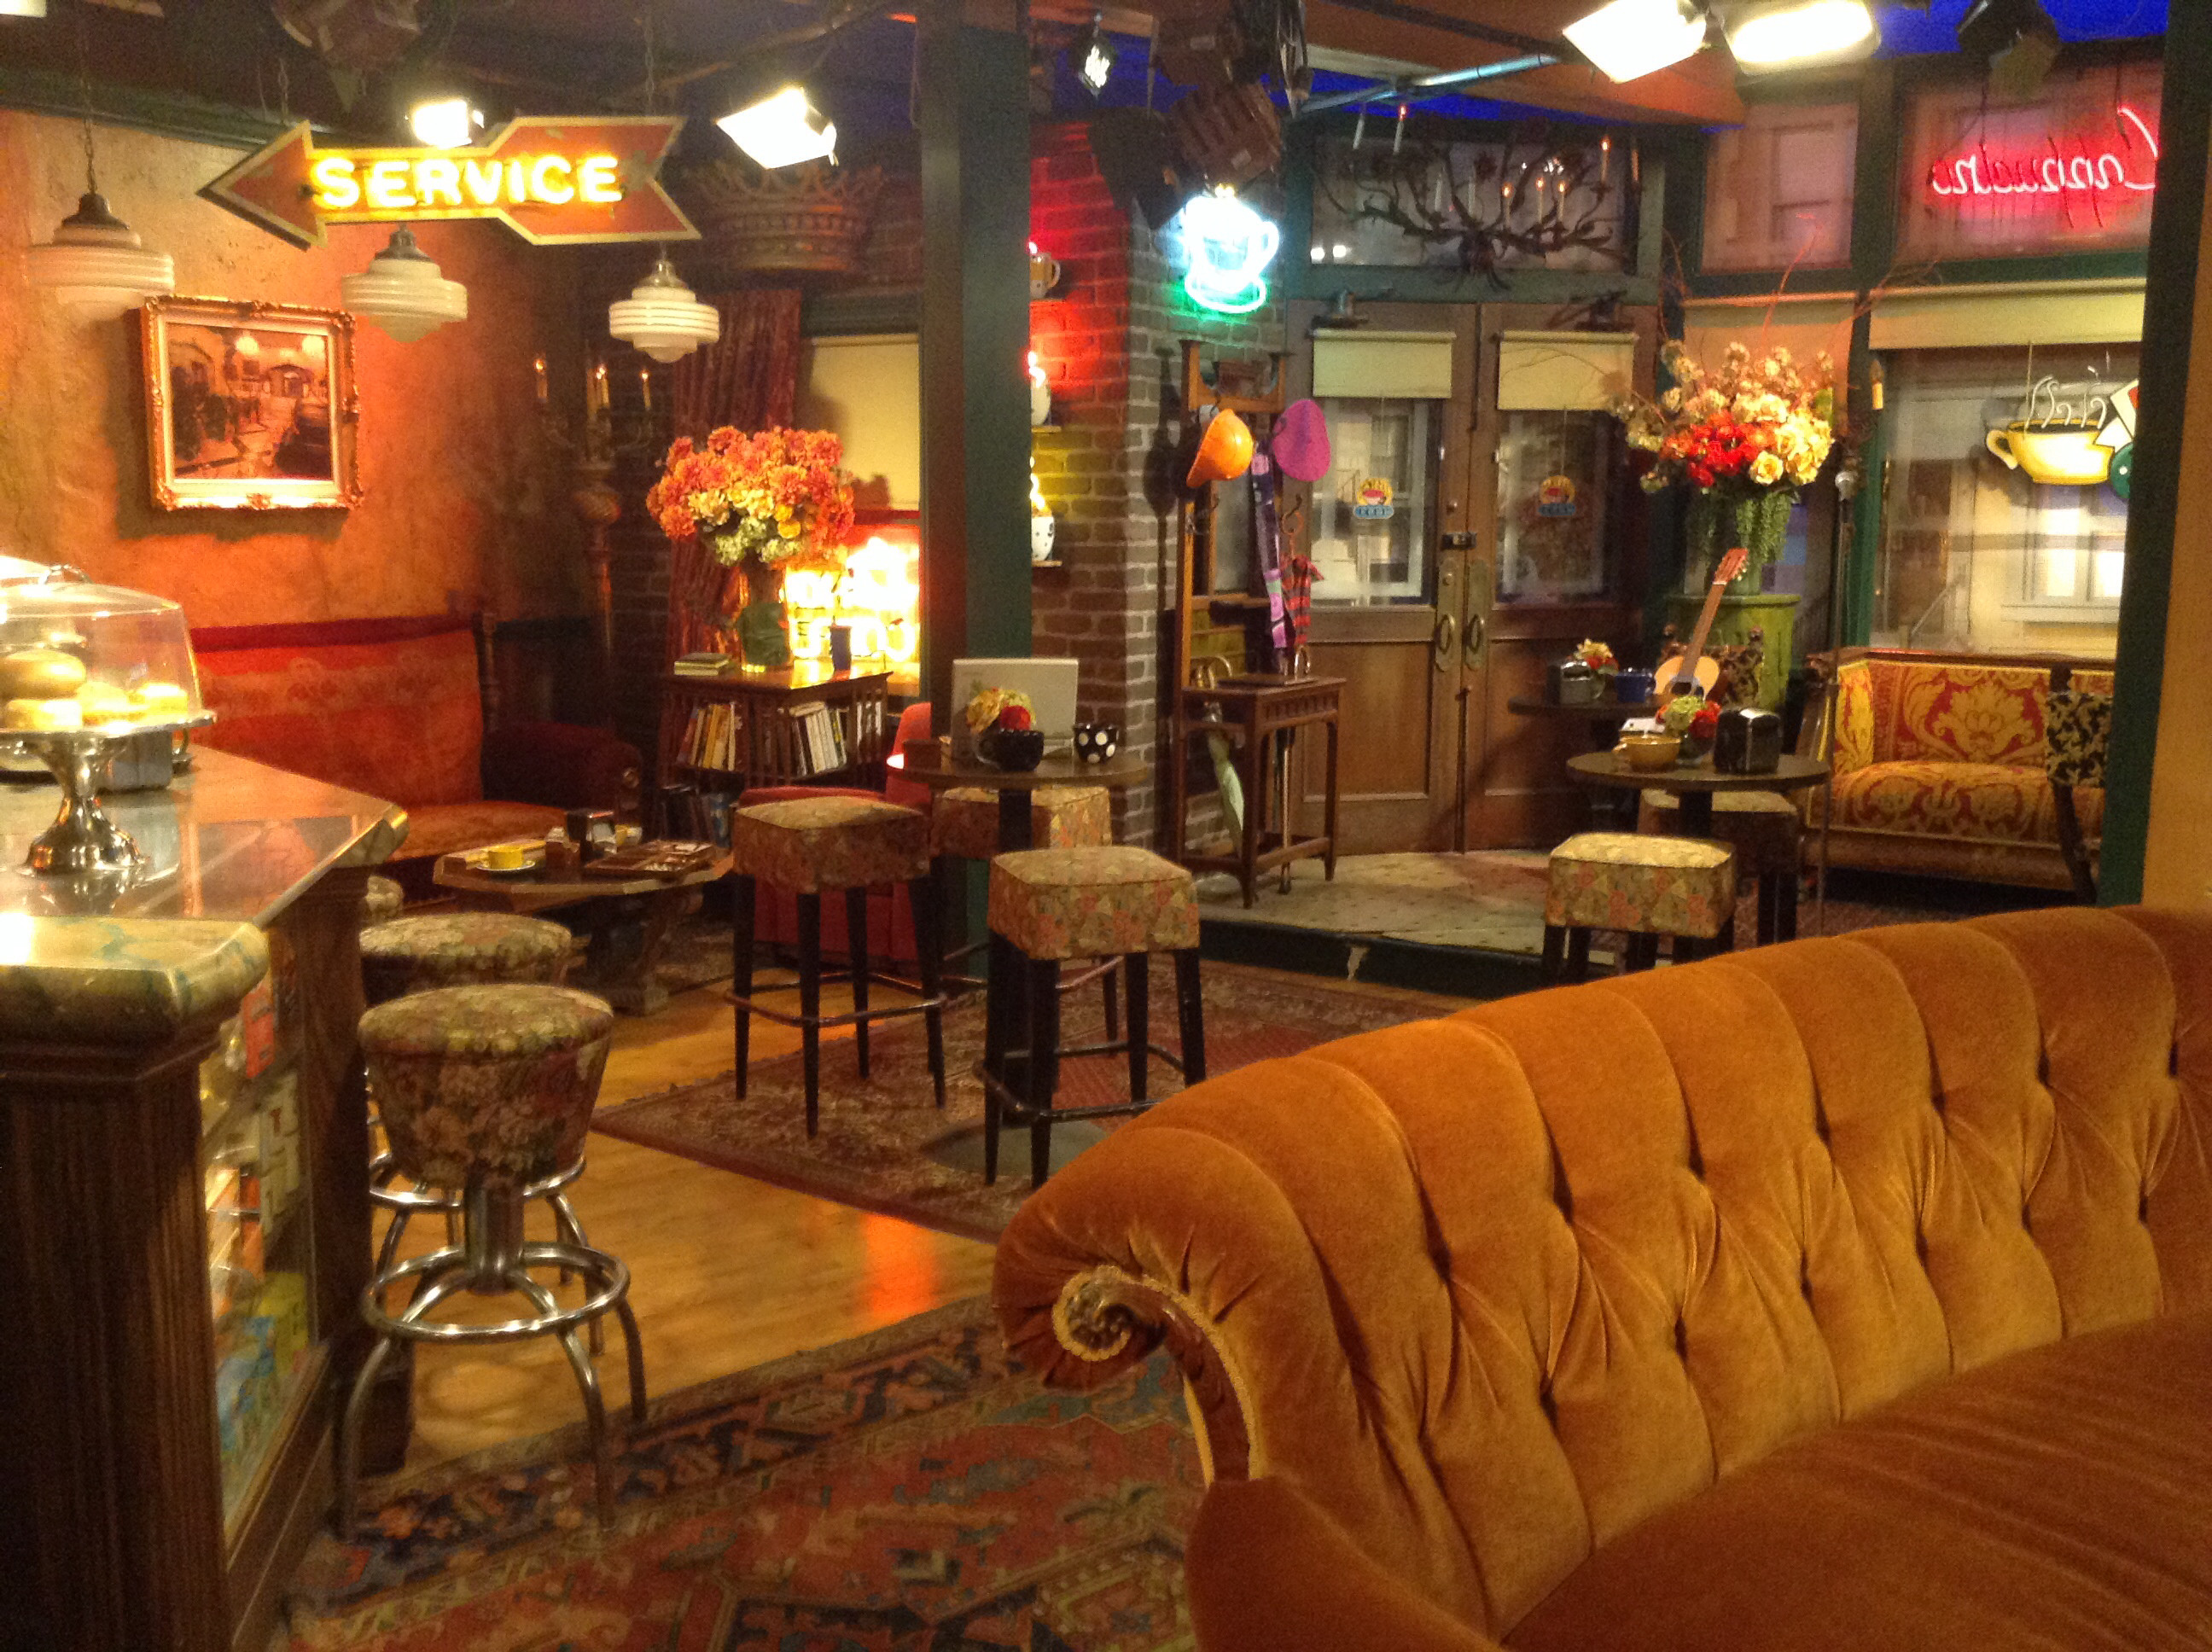 2592x1936 Central Perk on the WB lot. I miss Friends.